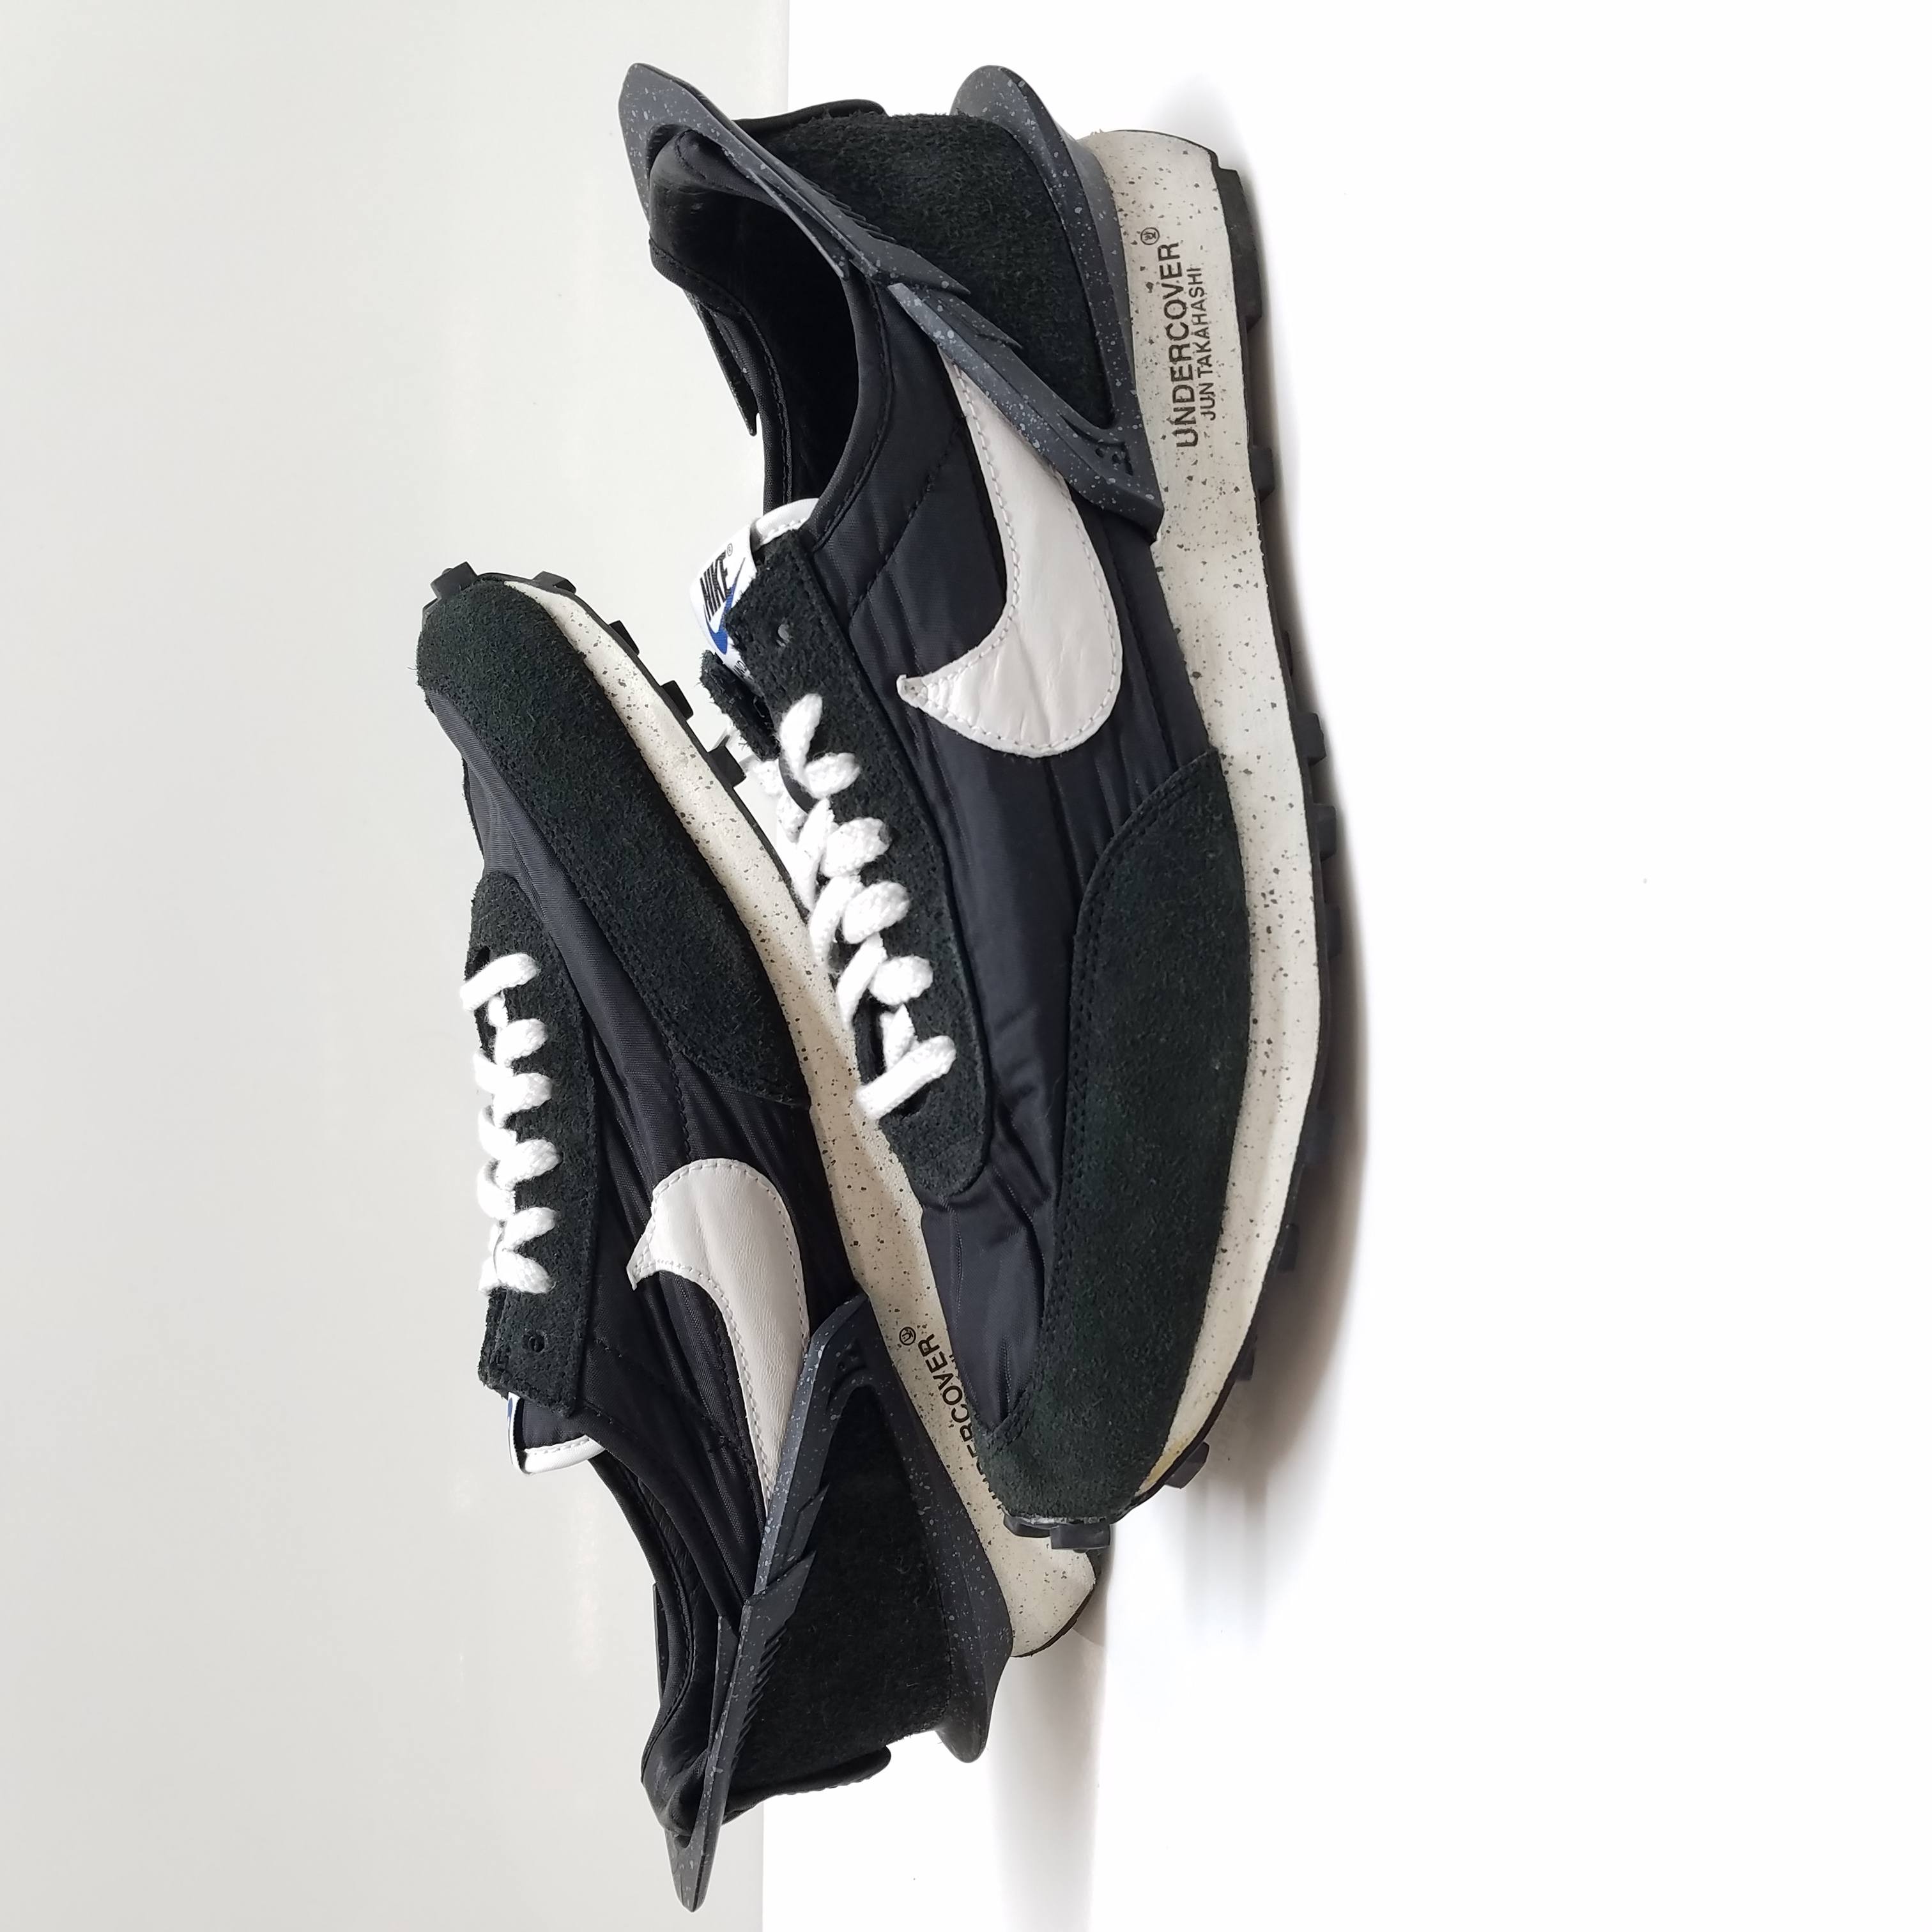 Respeto a ti mismo Norma Acostado Buy the AUTHENTICATED 2019 Men's Nike Daybreak x Undercover Black/White  BV4594-001 Size 11 | GoodwillFinds